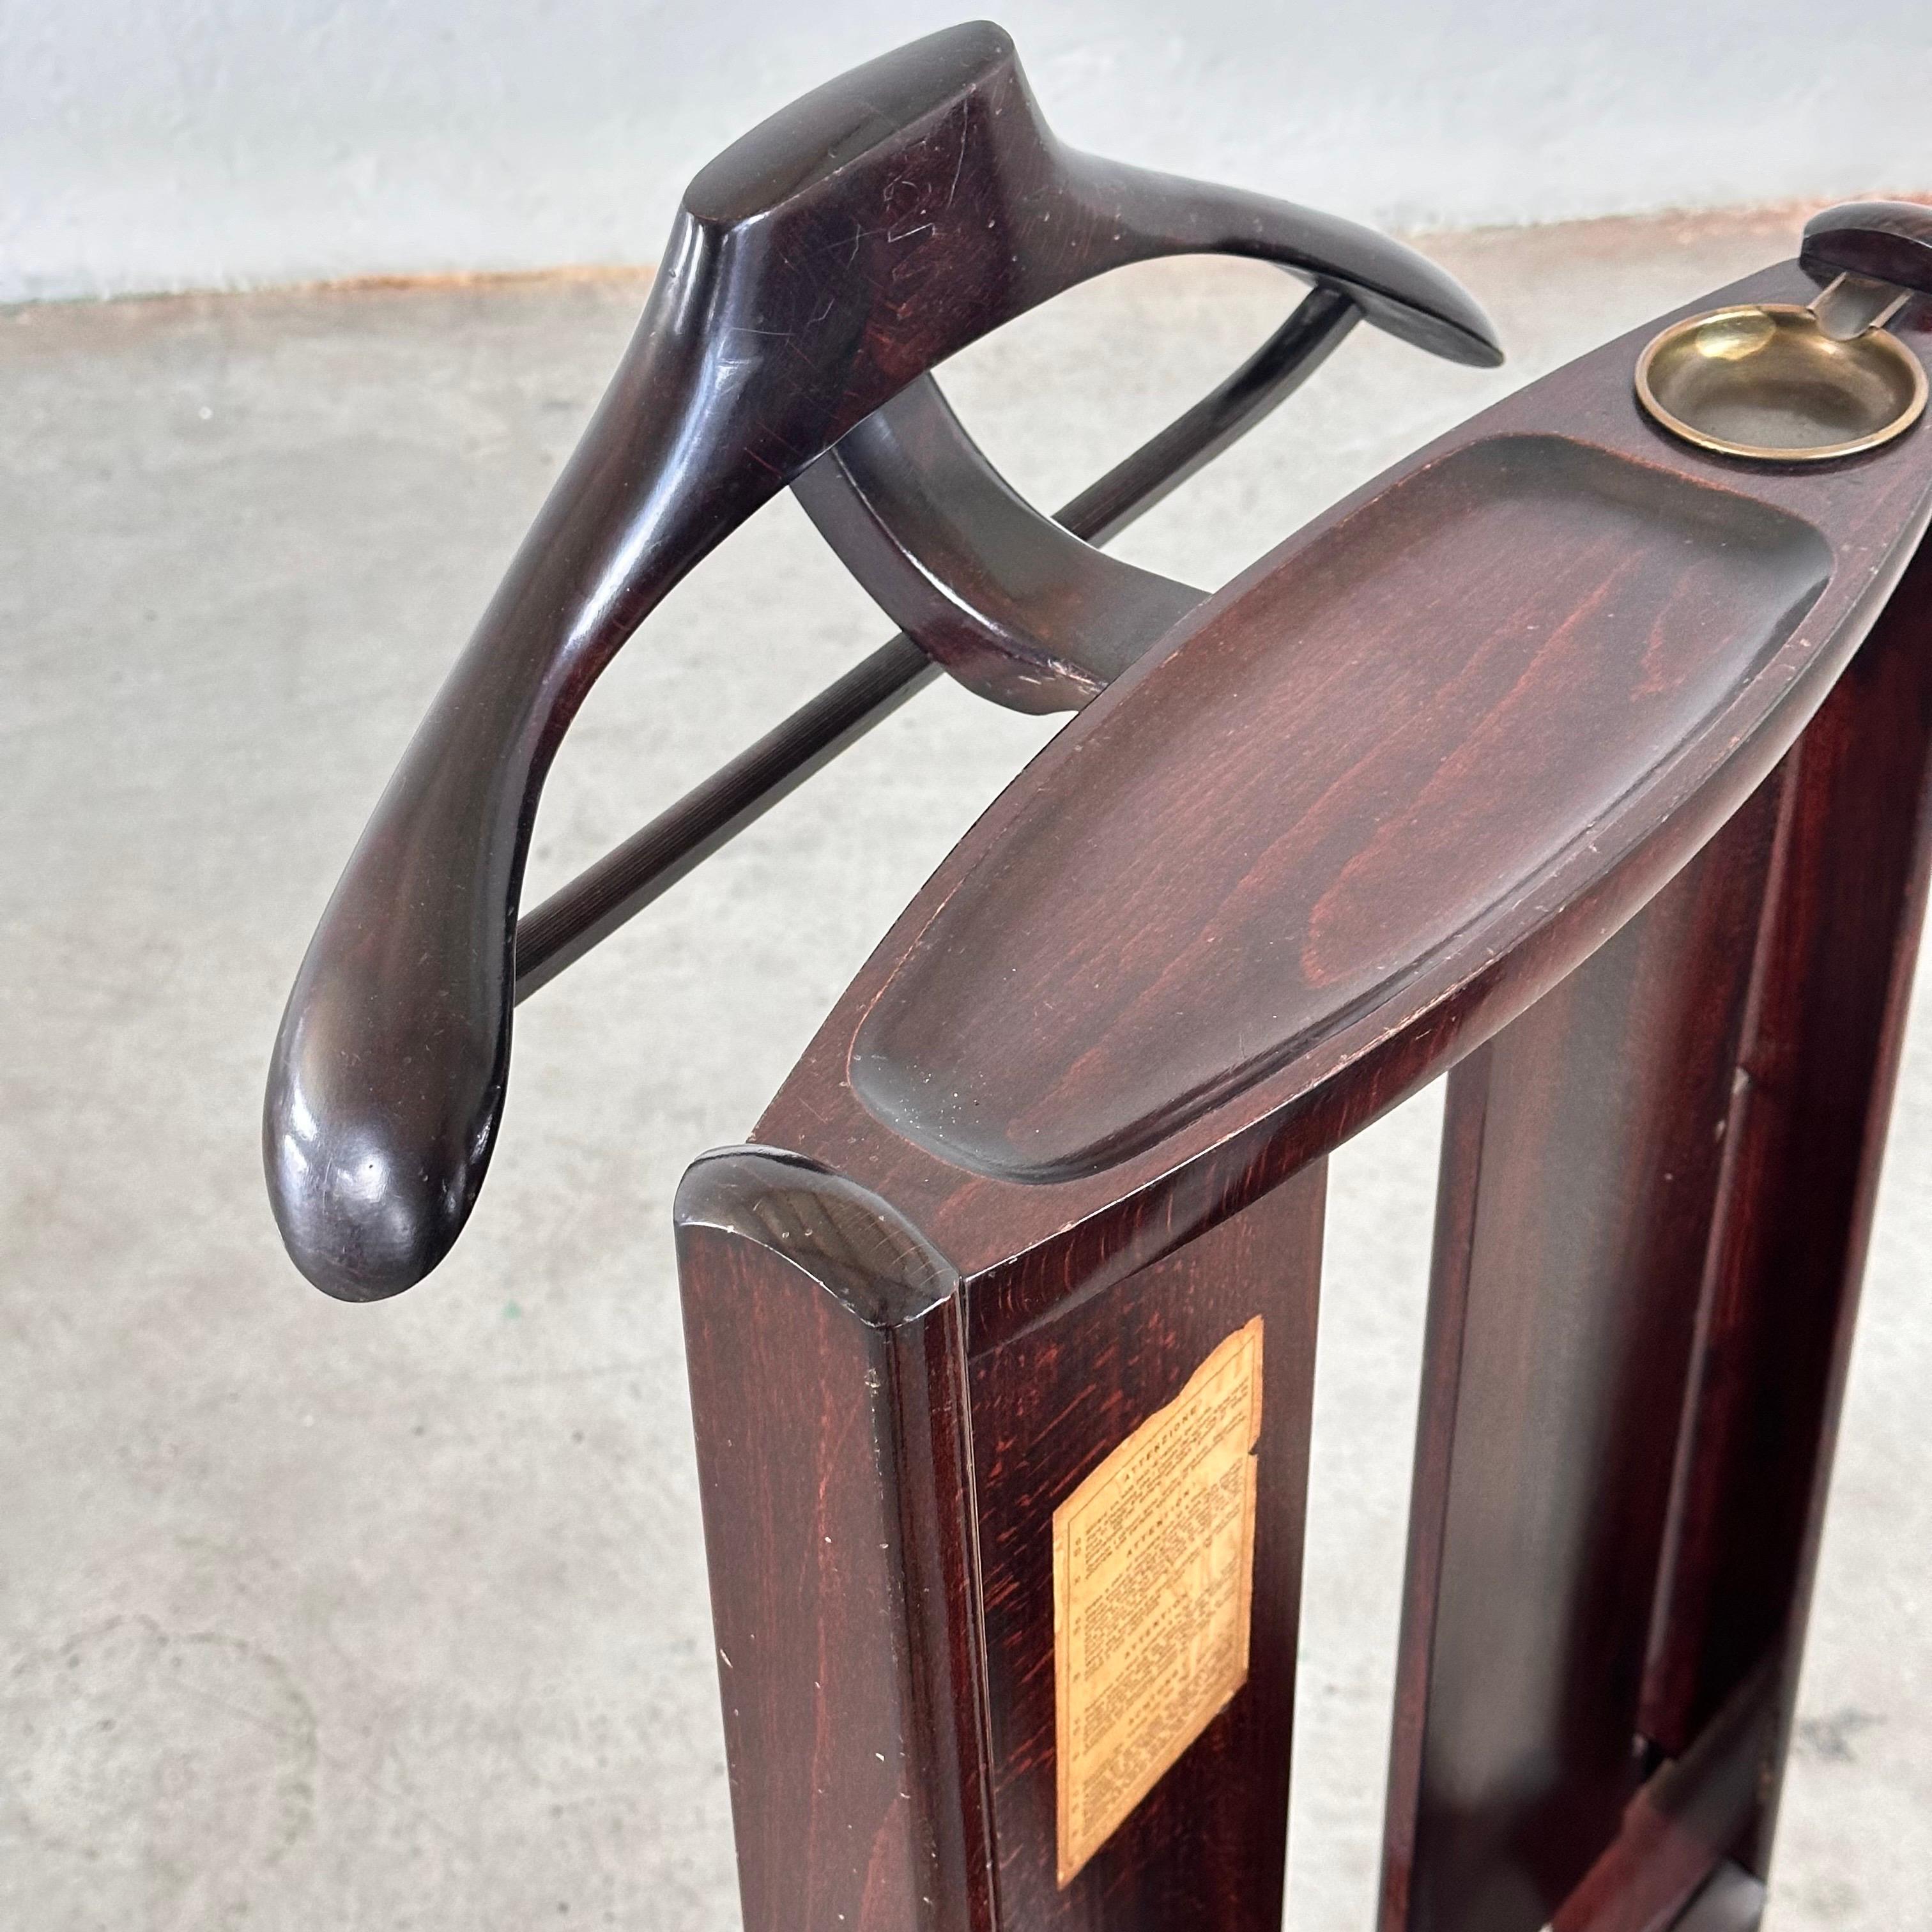 Exquisite 1950s Fratelli Reguitti Clothes Valet Stand by Ico Parisi  For Sale 4